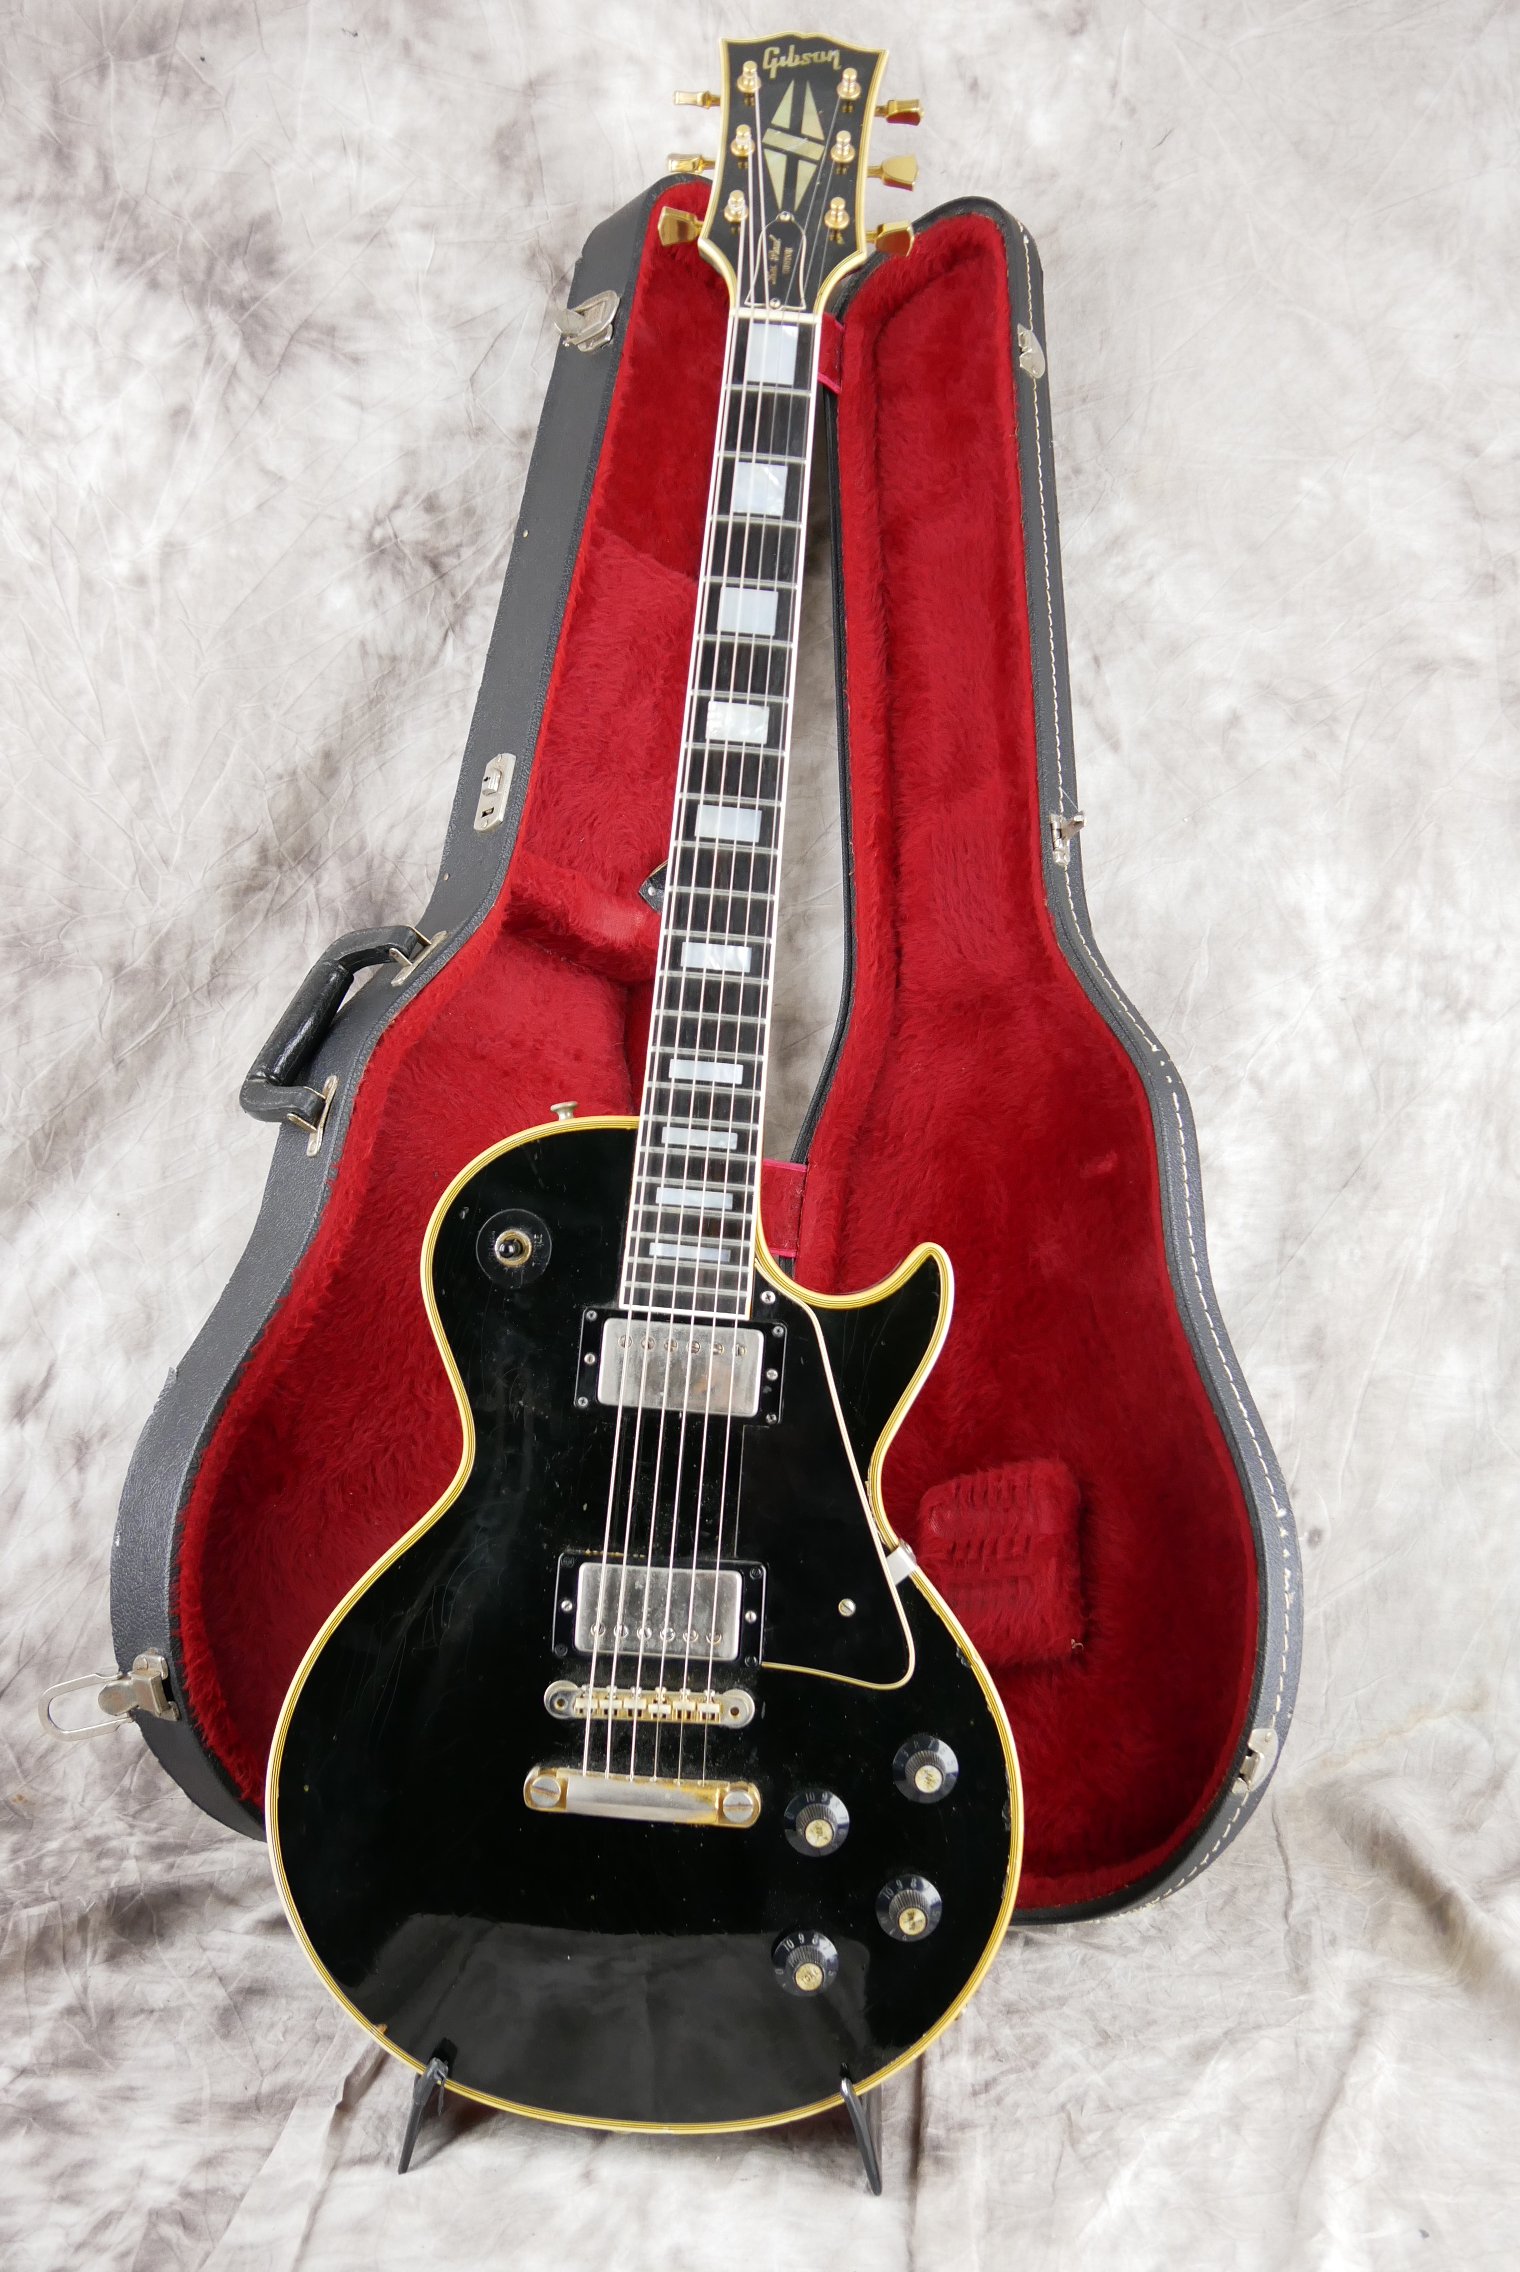 img/vintage/5115/Gibson-Les-Paul-Custom-1969-one-piece-body-and-neck-032.JPG